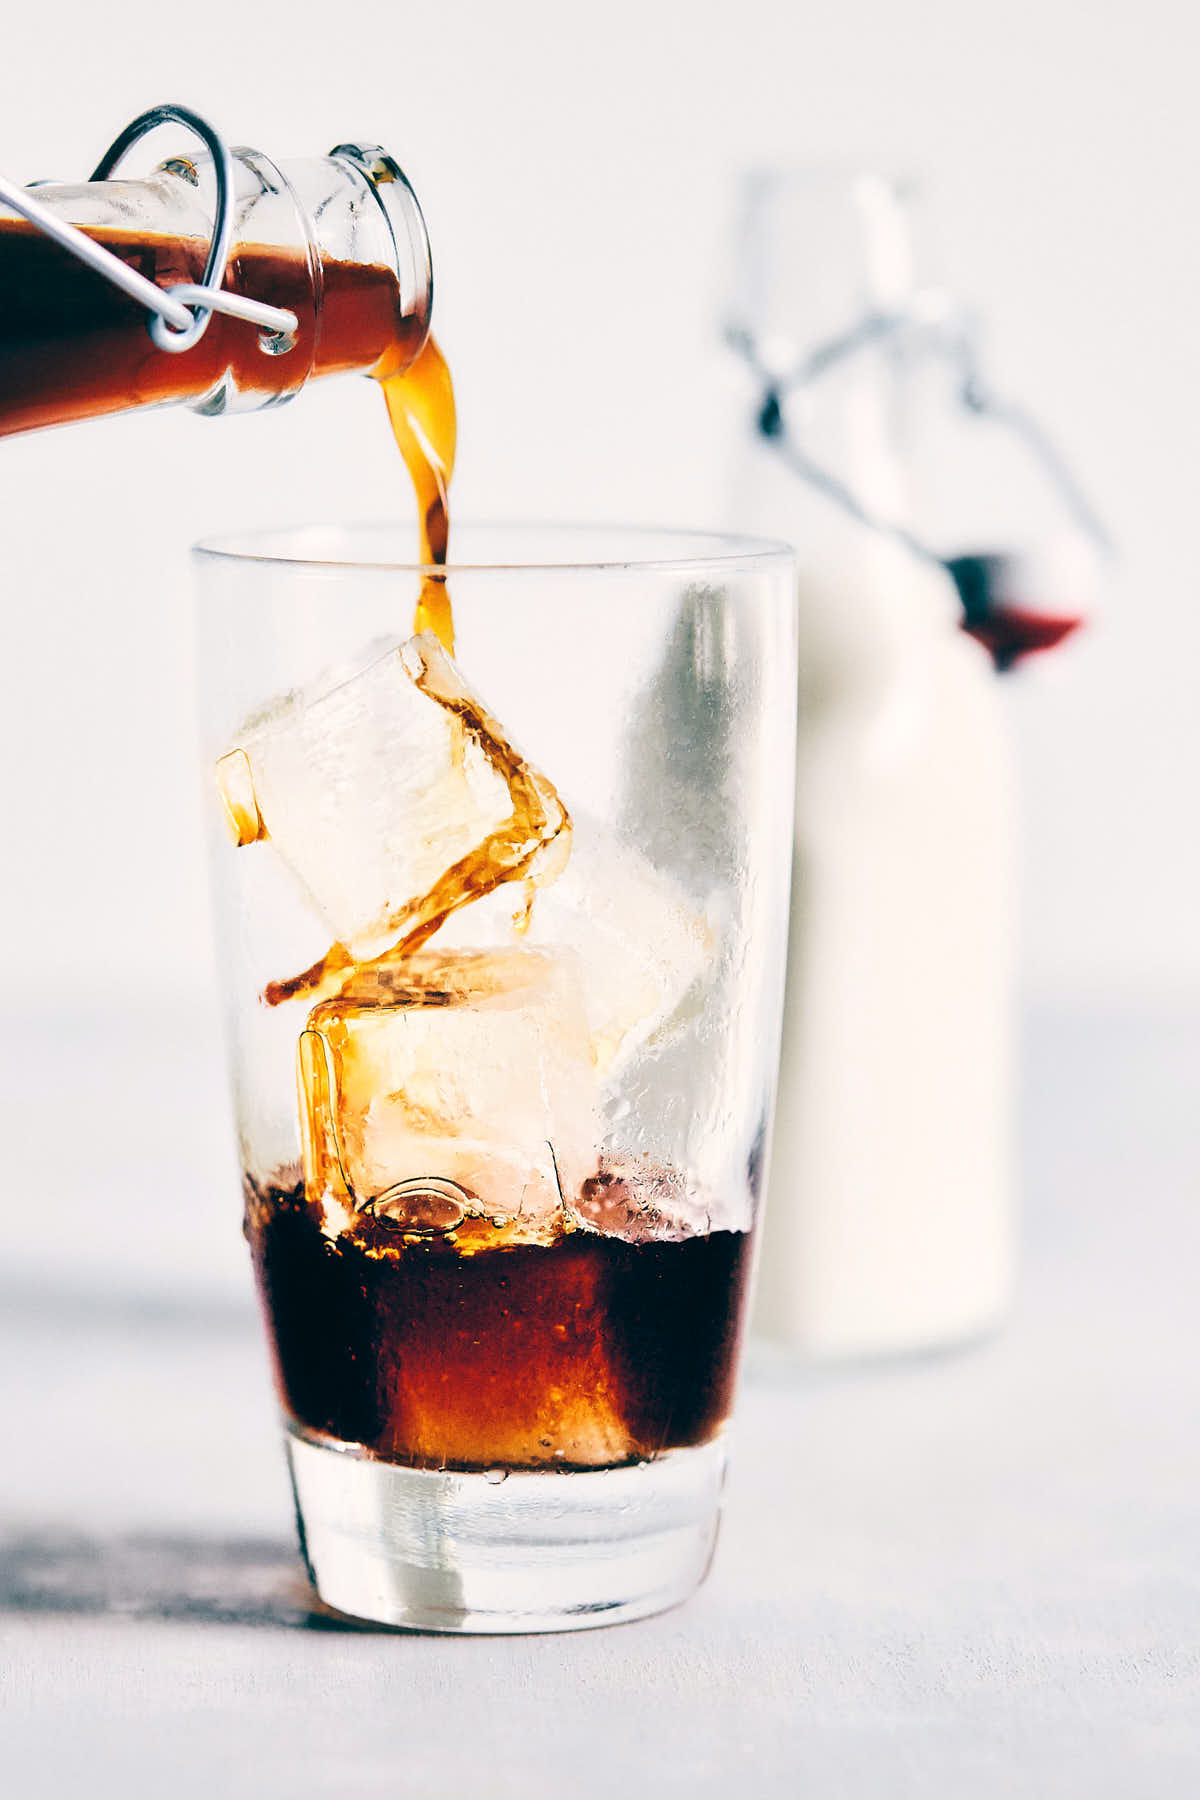 Cold brew coffee being poured over ice in a glass with cream in the background